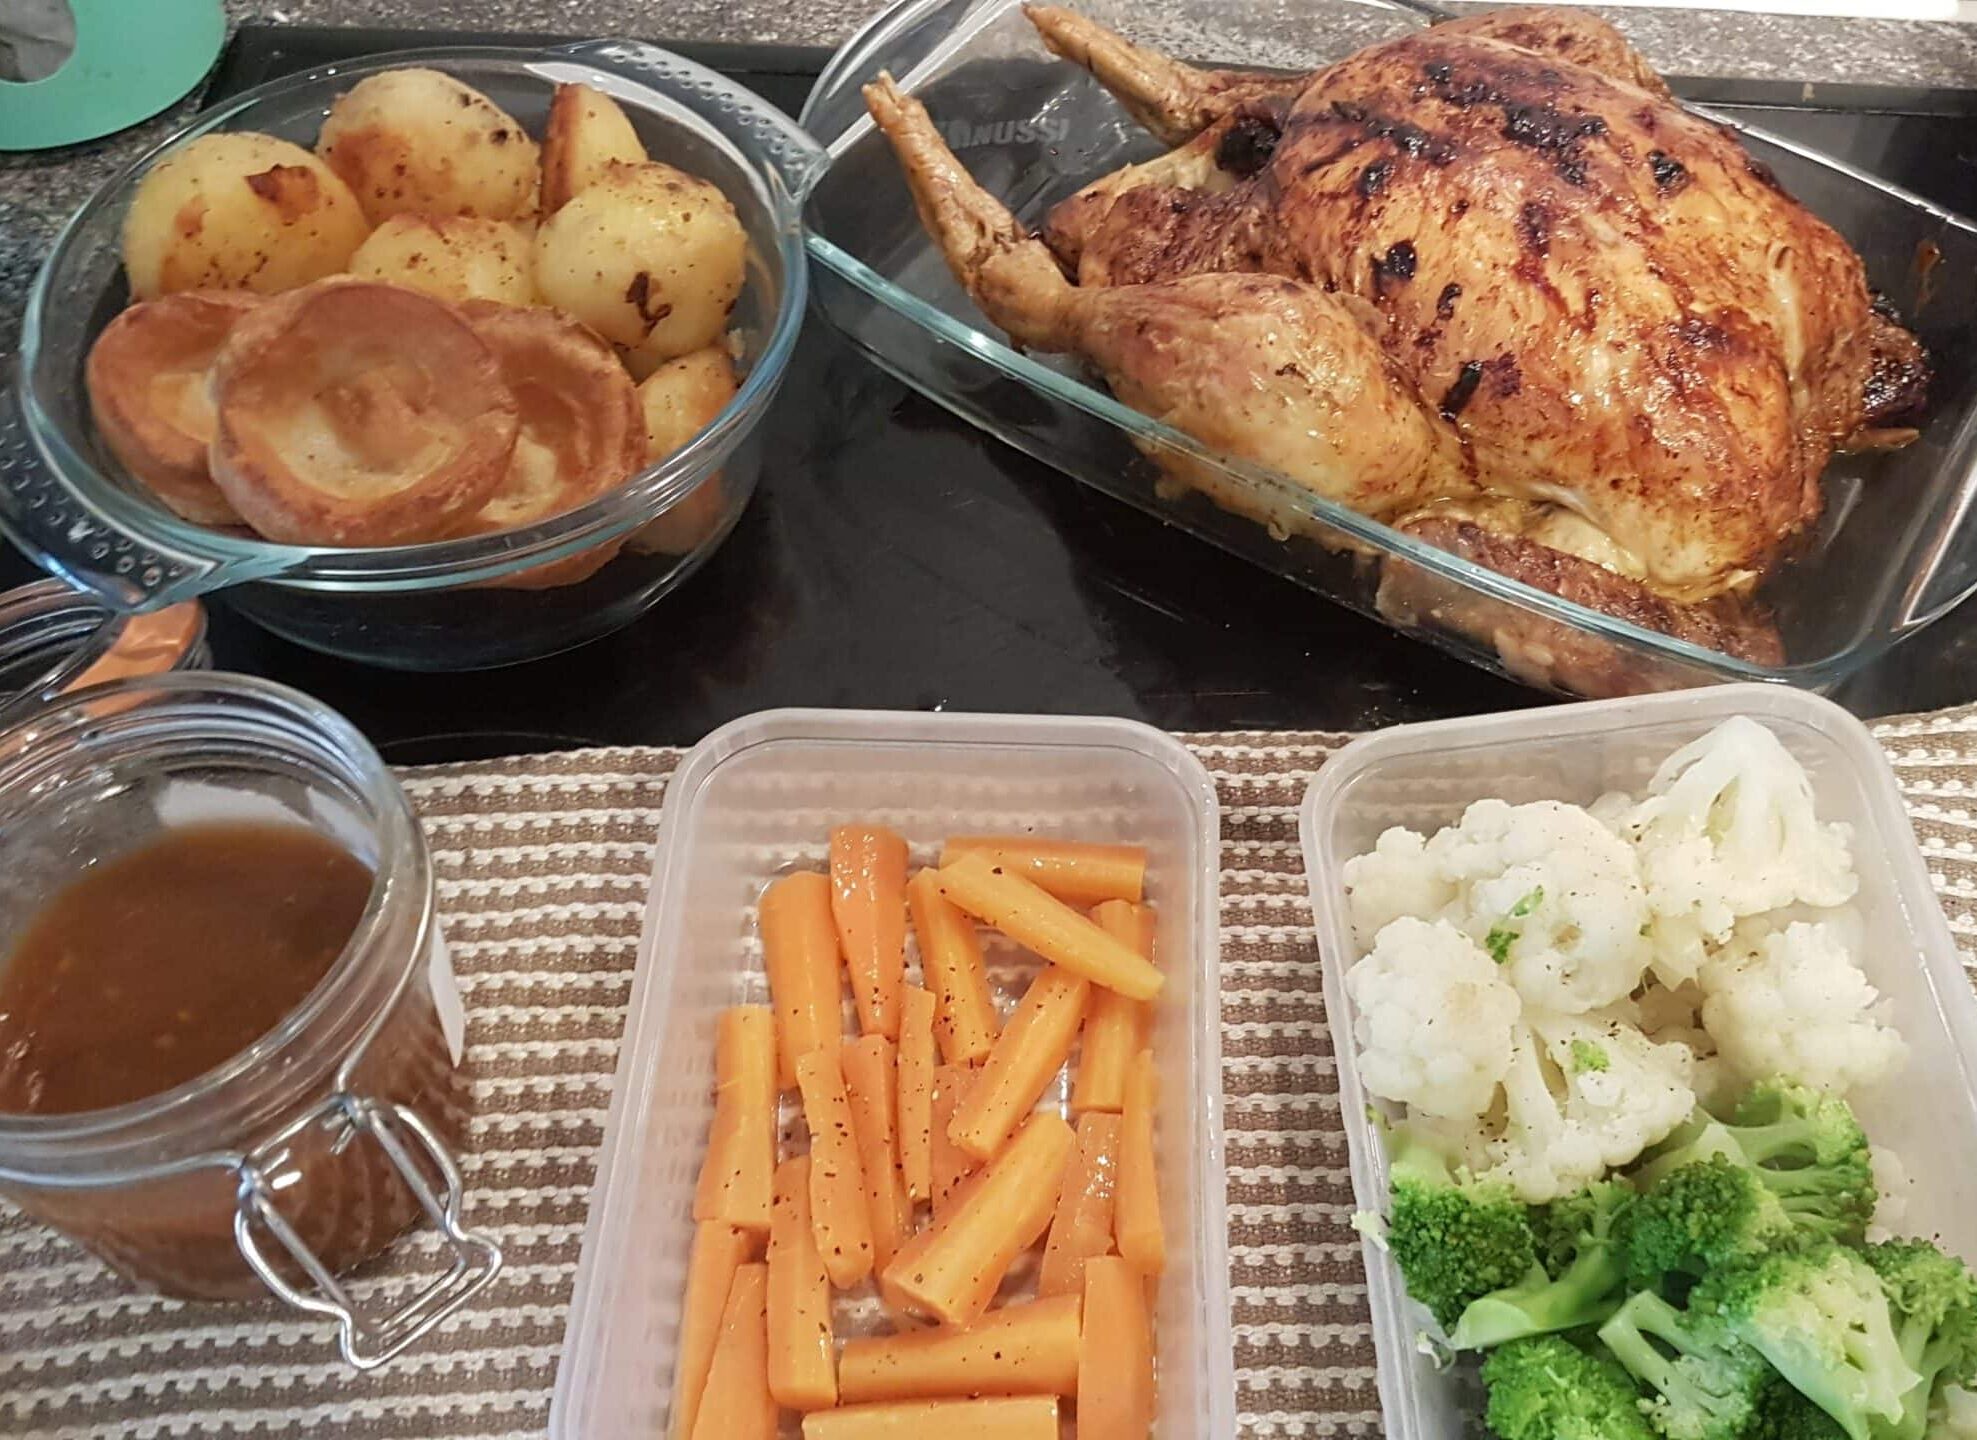 Roast dinner delivered to vulnerable people in London